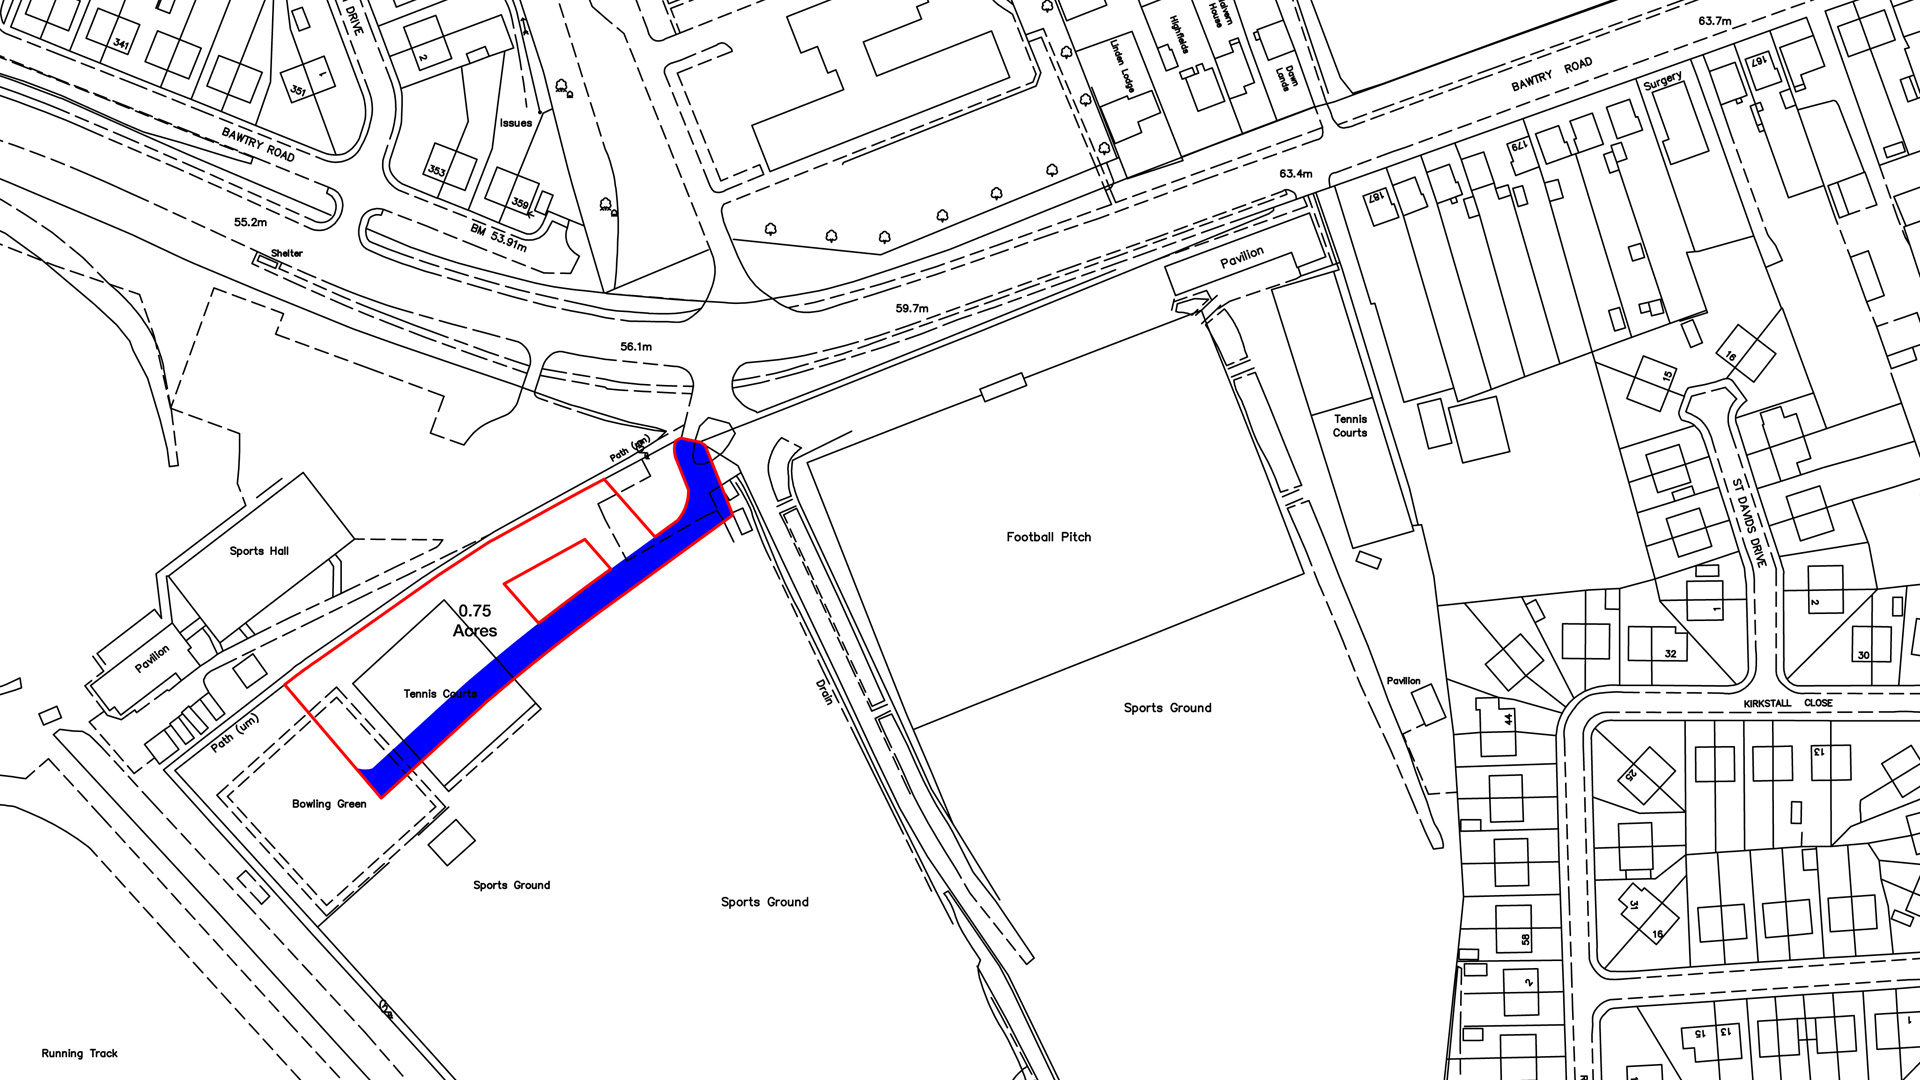 Land for sale in Sheffield site plan